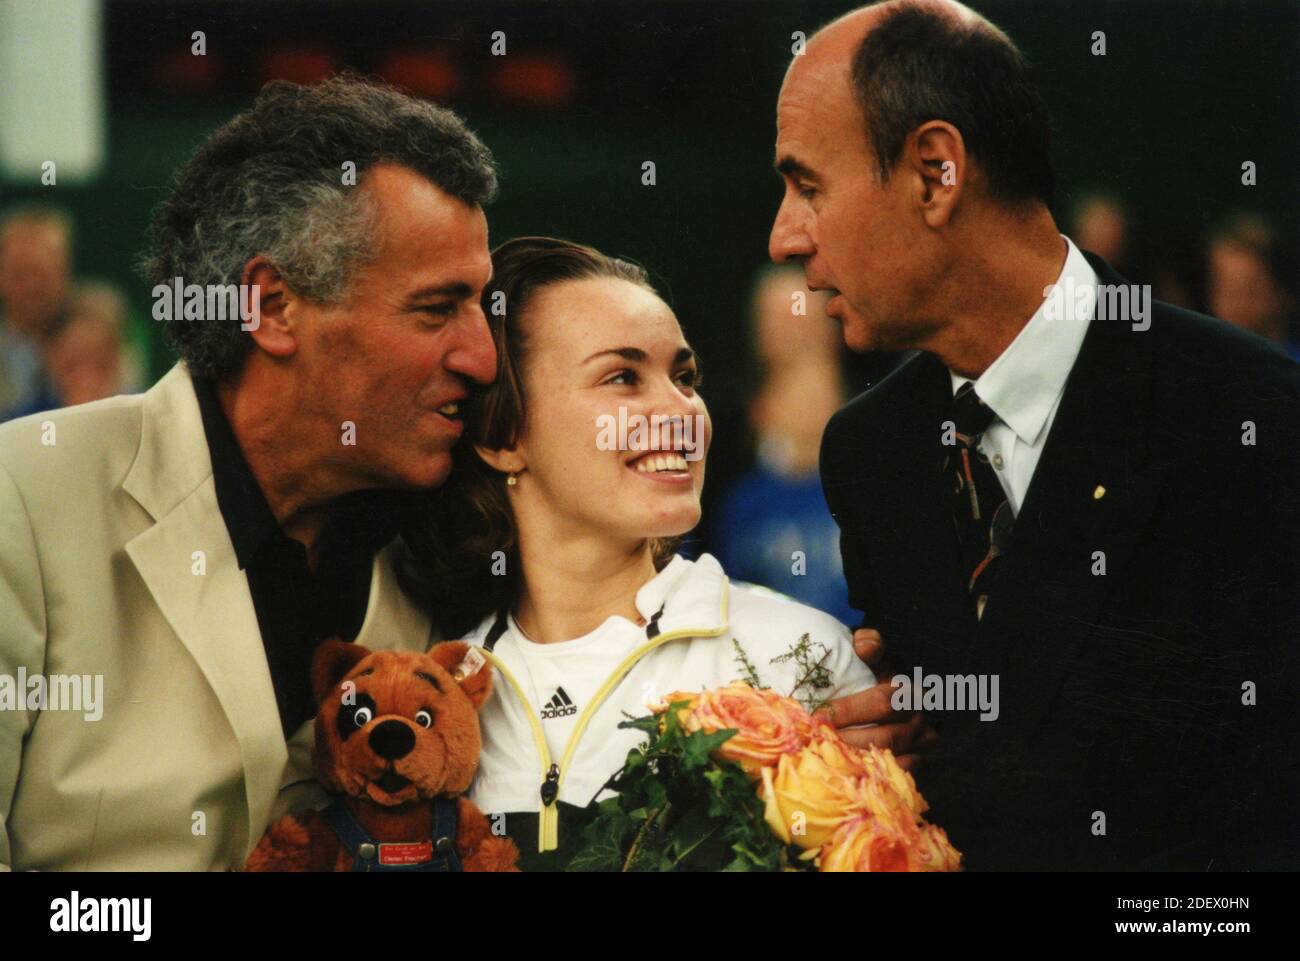 Swiss tennis player Martina Hingis with D. Fisher and U. Cervellini, Filderstadt, Germany 1999 Stock Photo